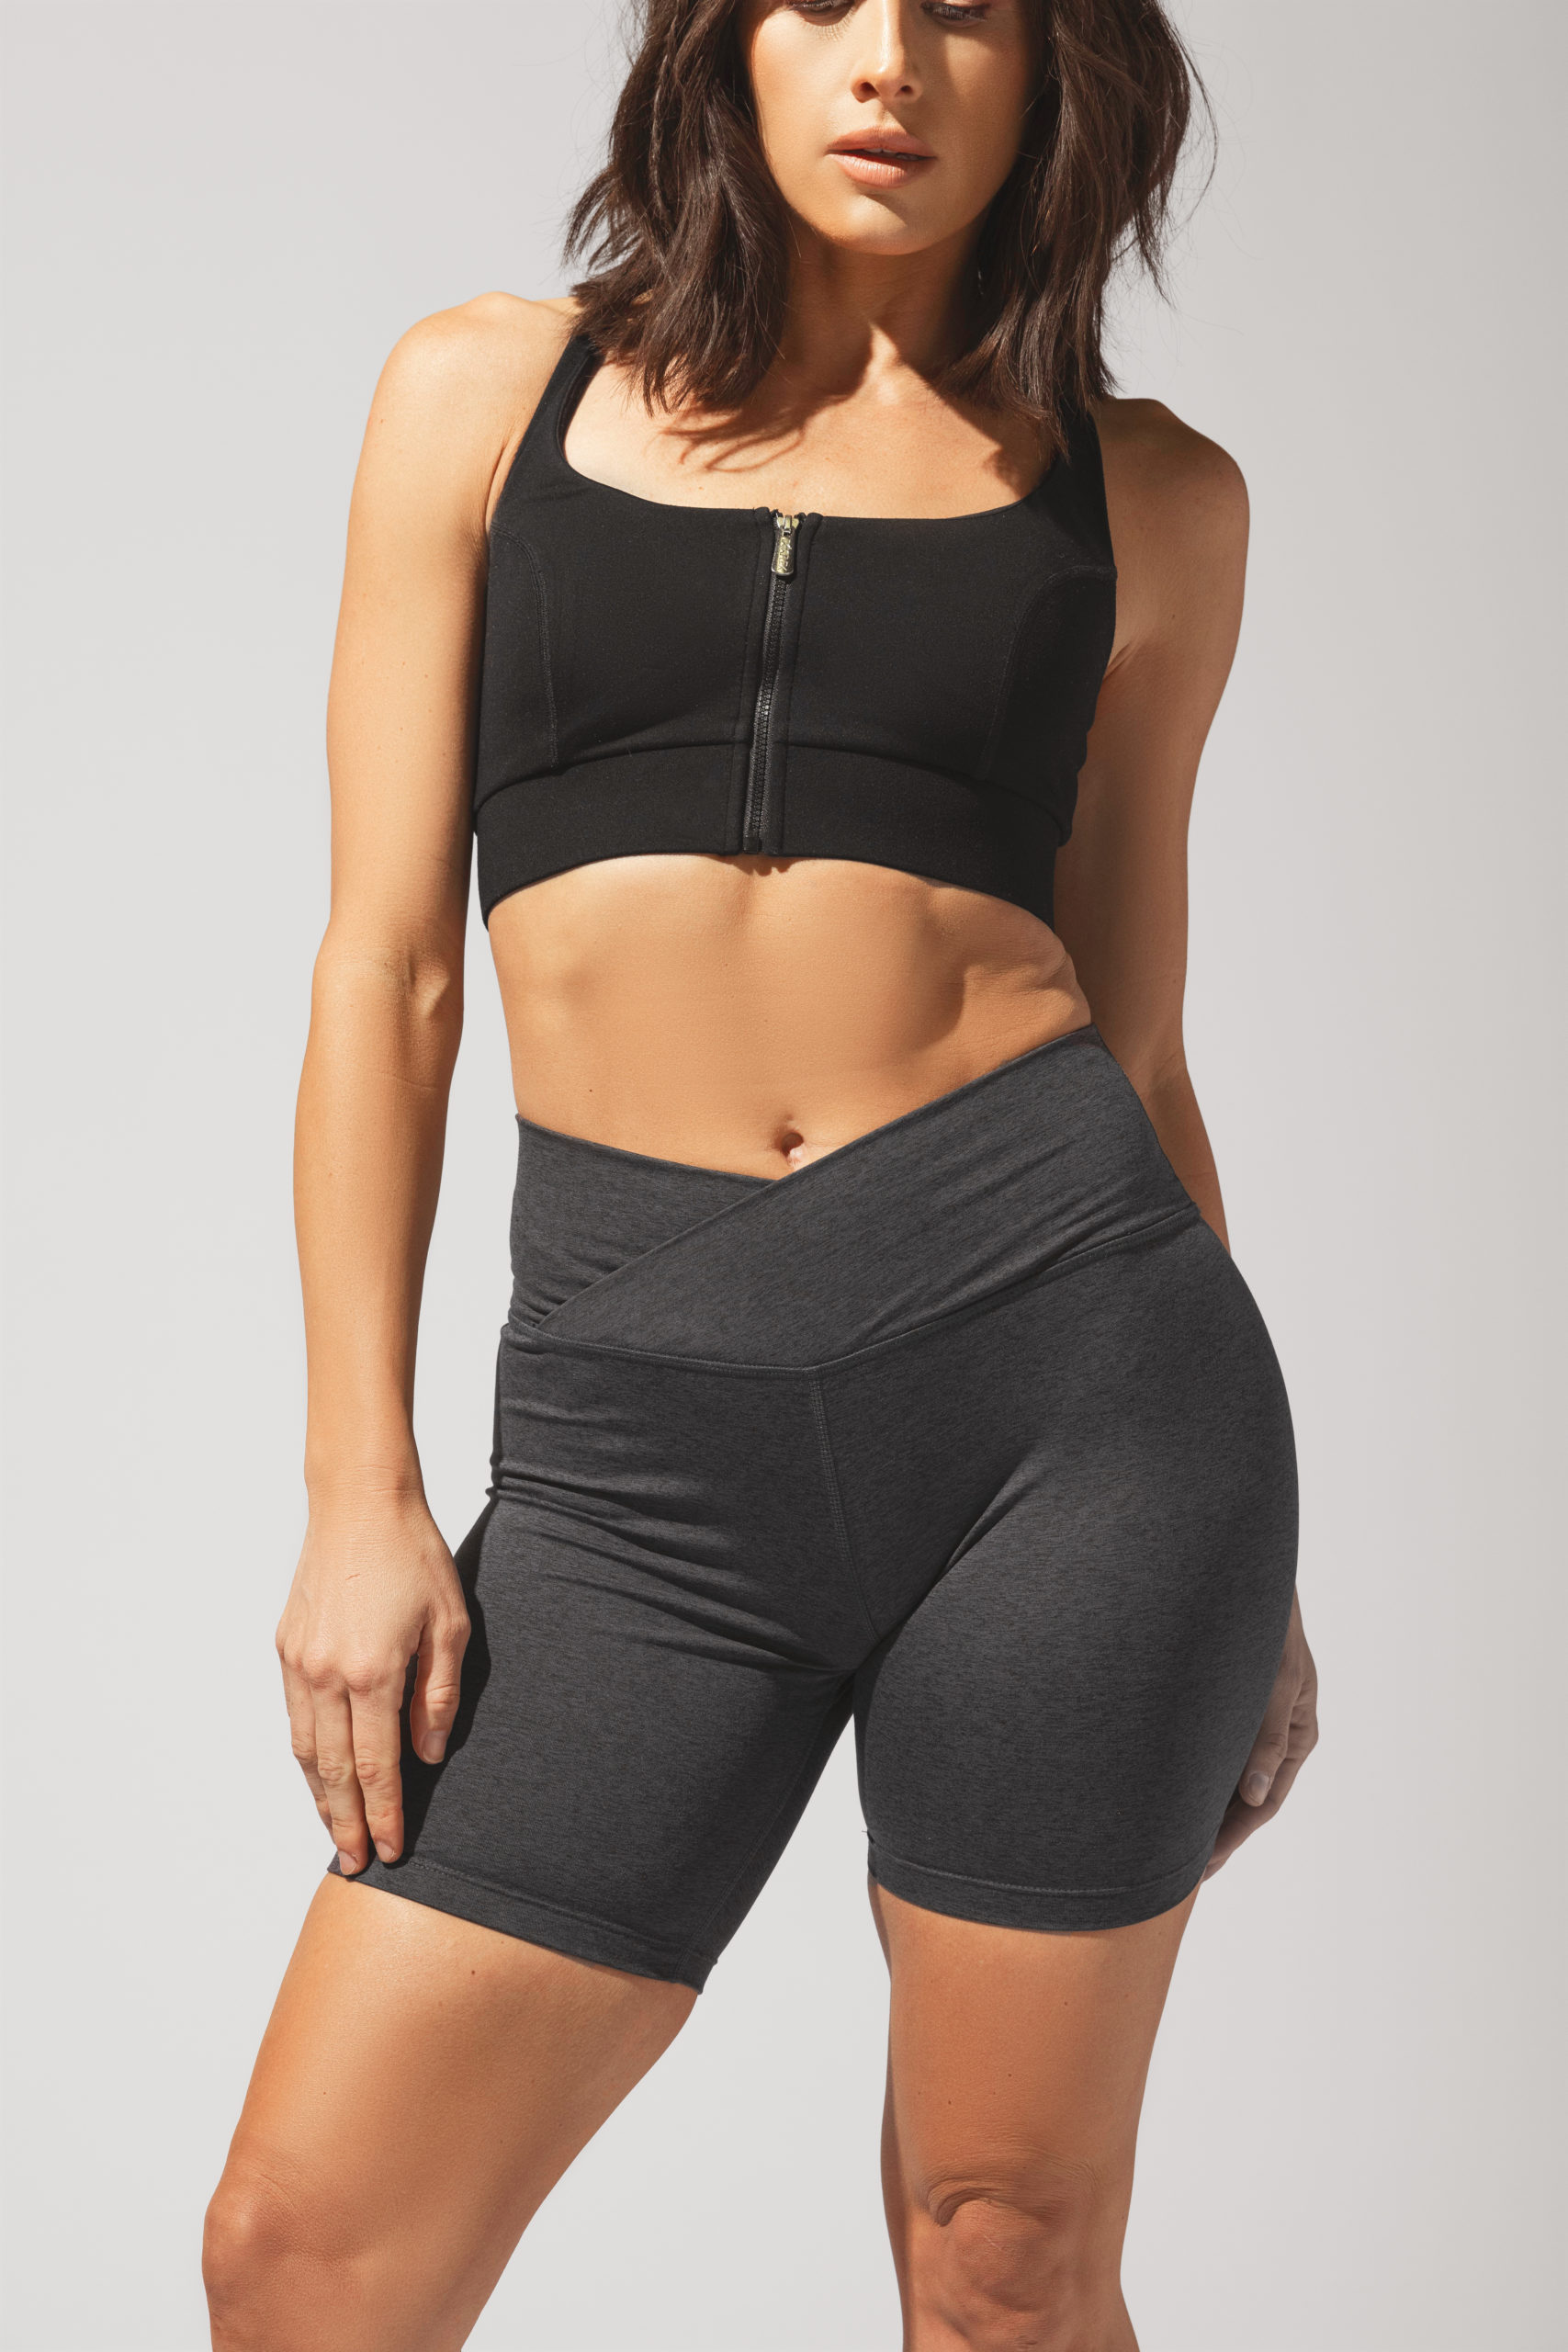 Meet Heathers, your capsule collection of luxe workout wear - Blogilates